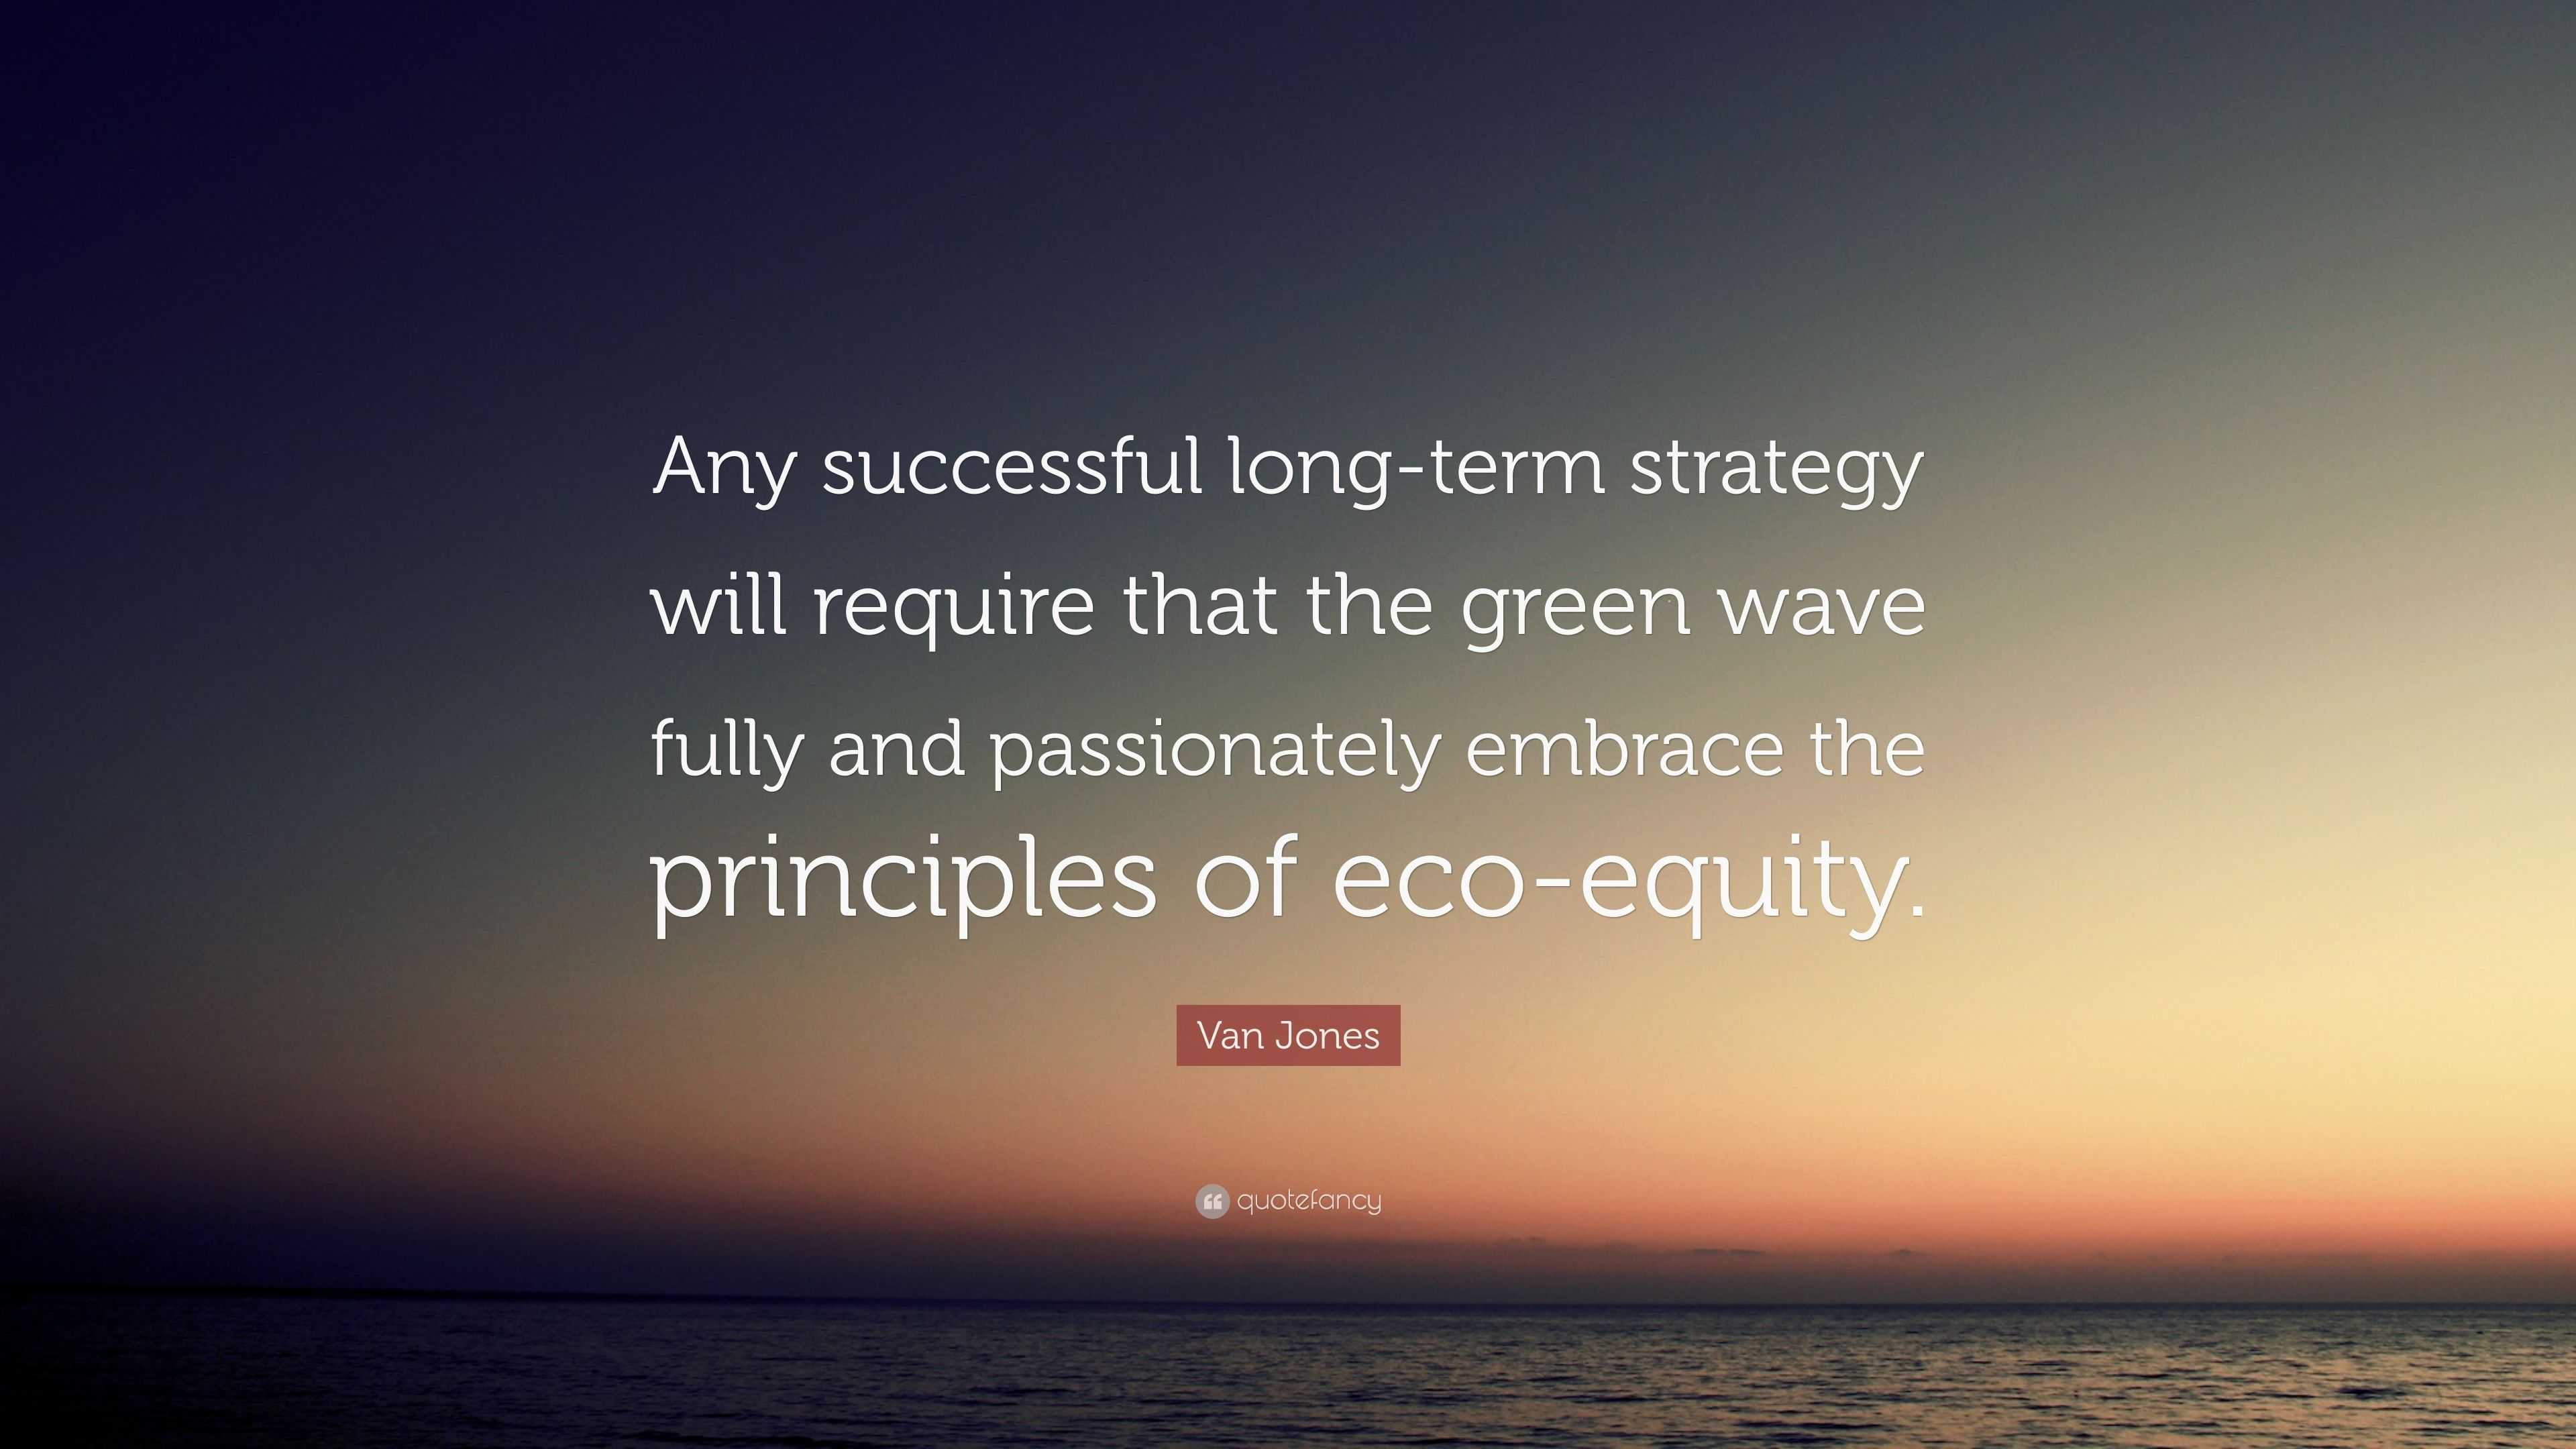 Van Jones Quote: “Any successful long-term strategy will require